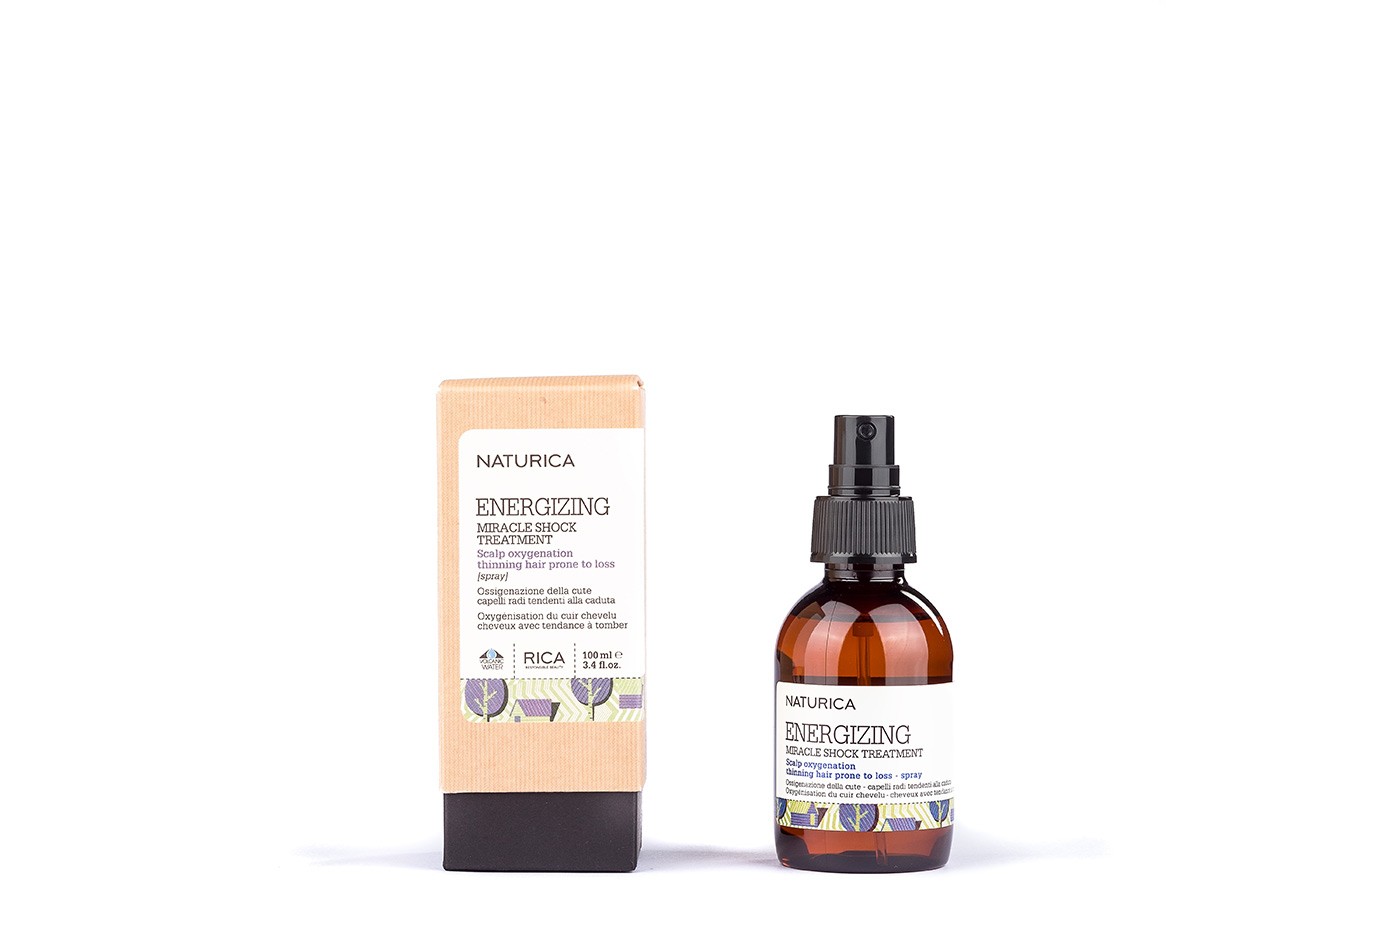 Restore health to lacklustre hair with Naturica’s Energizing Miracle Shock Treatment